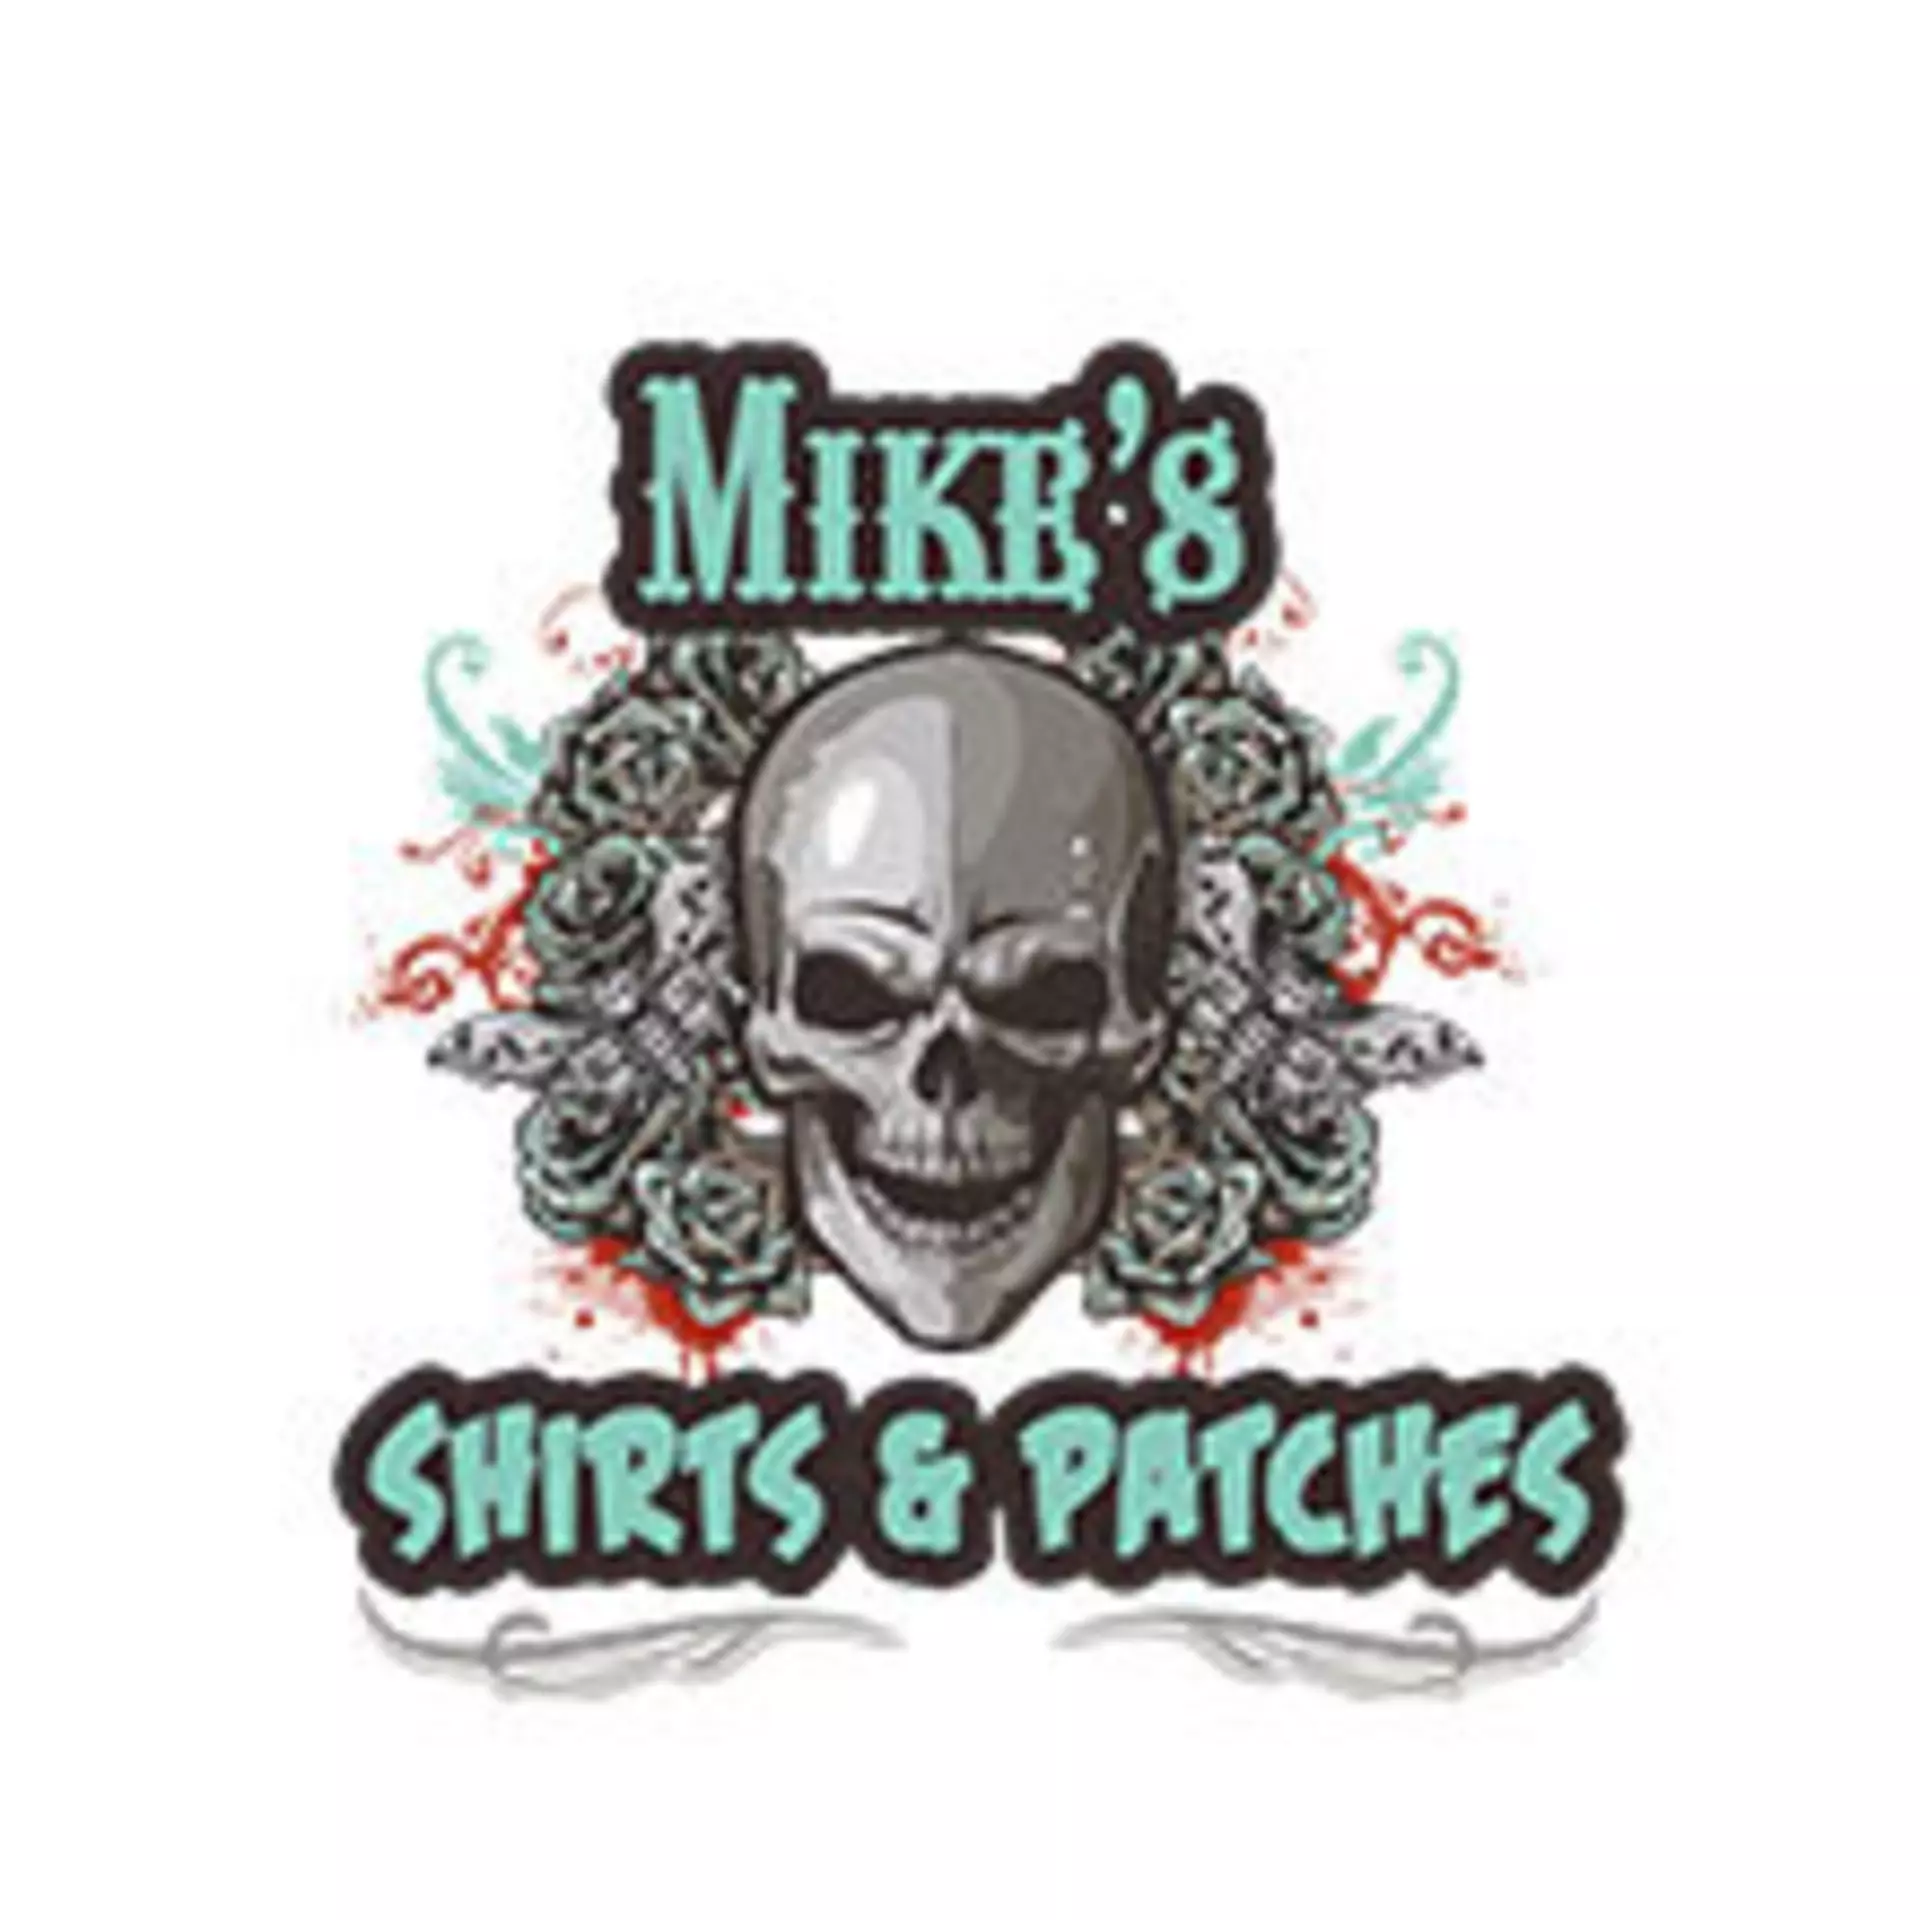 Mike's Shirts & Patches